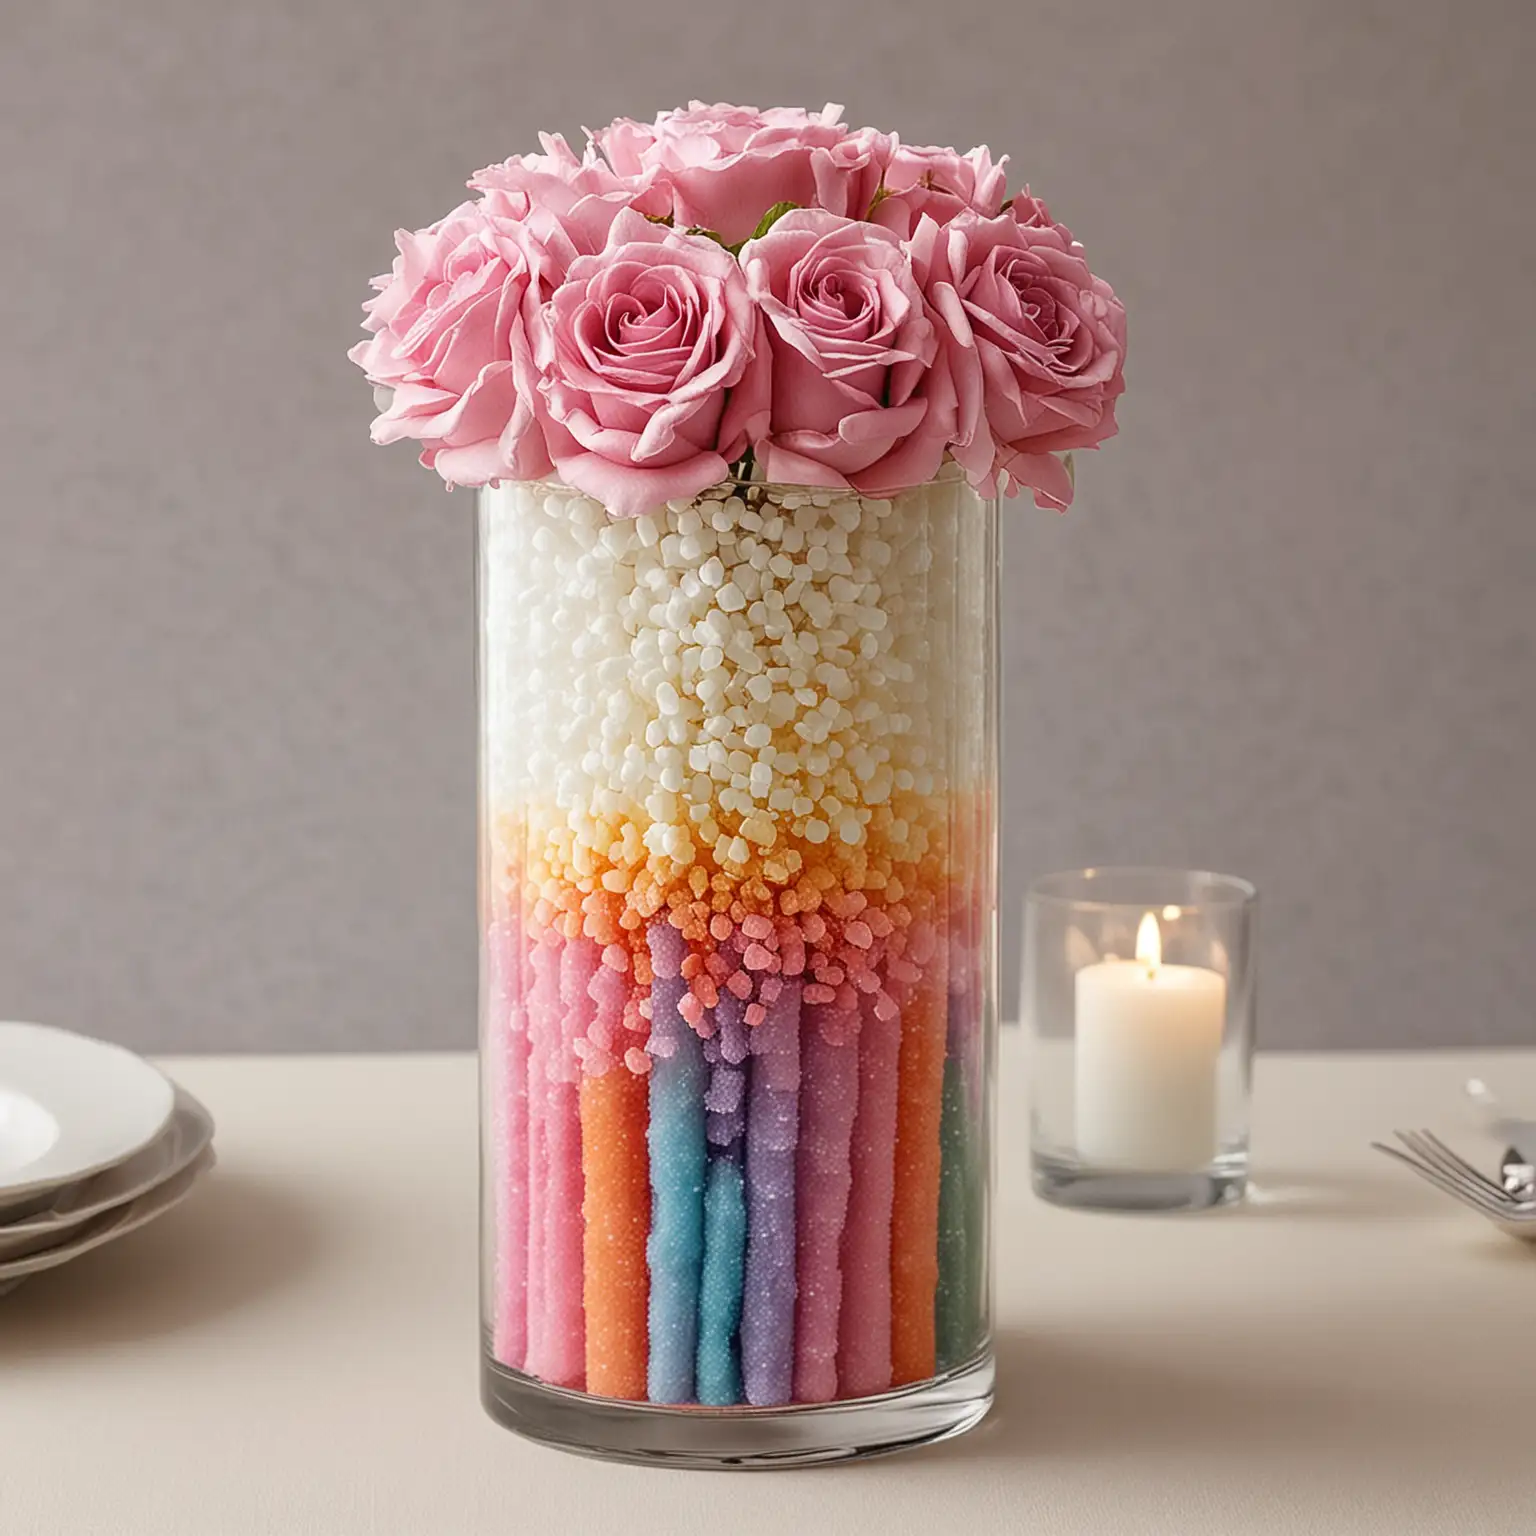 a simple DIY wedding centerpiece using a glass cylinder vase filled with layers of colored sugar for a simple centerpiece